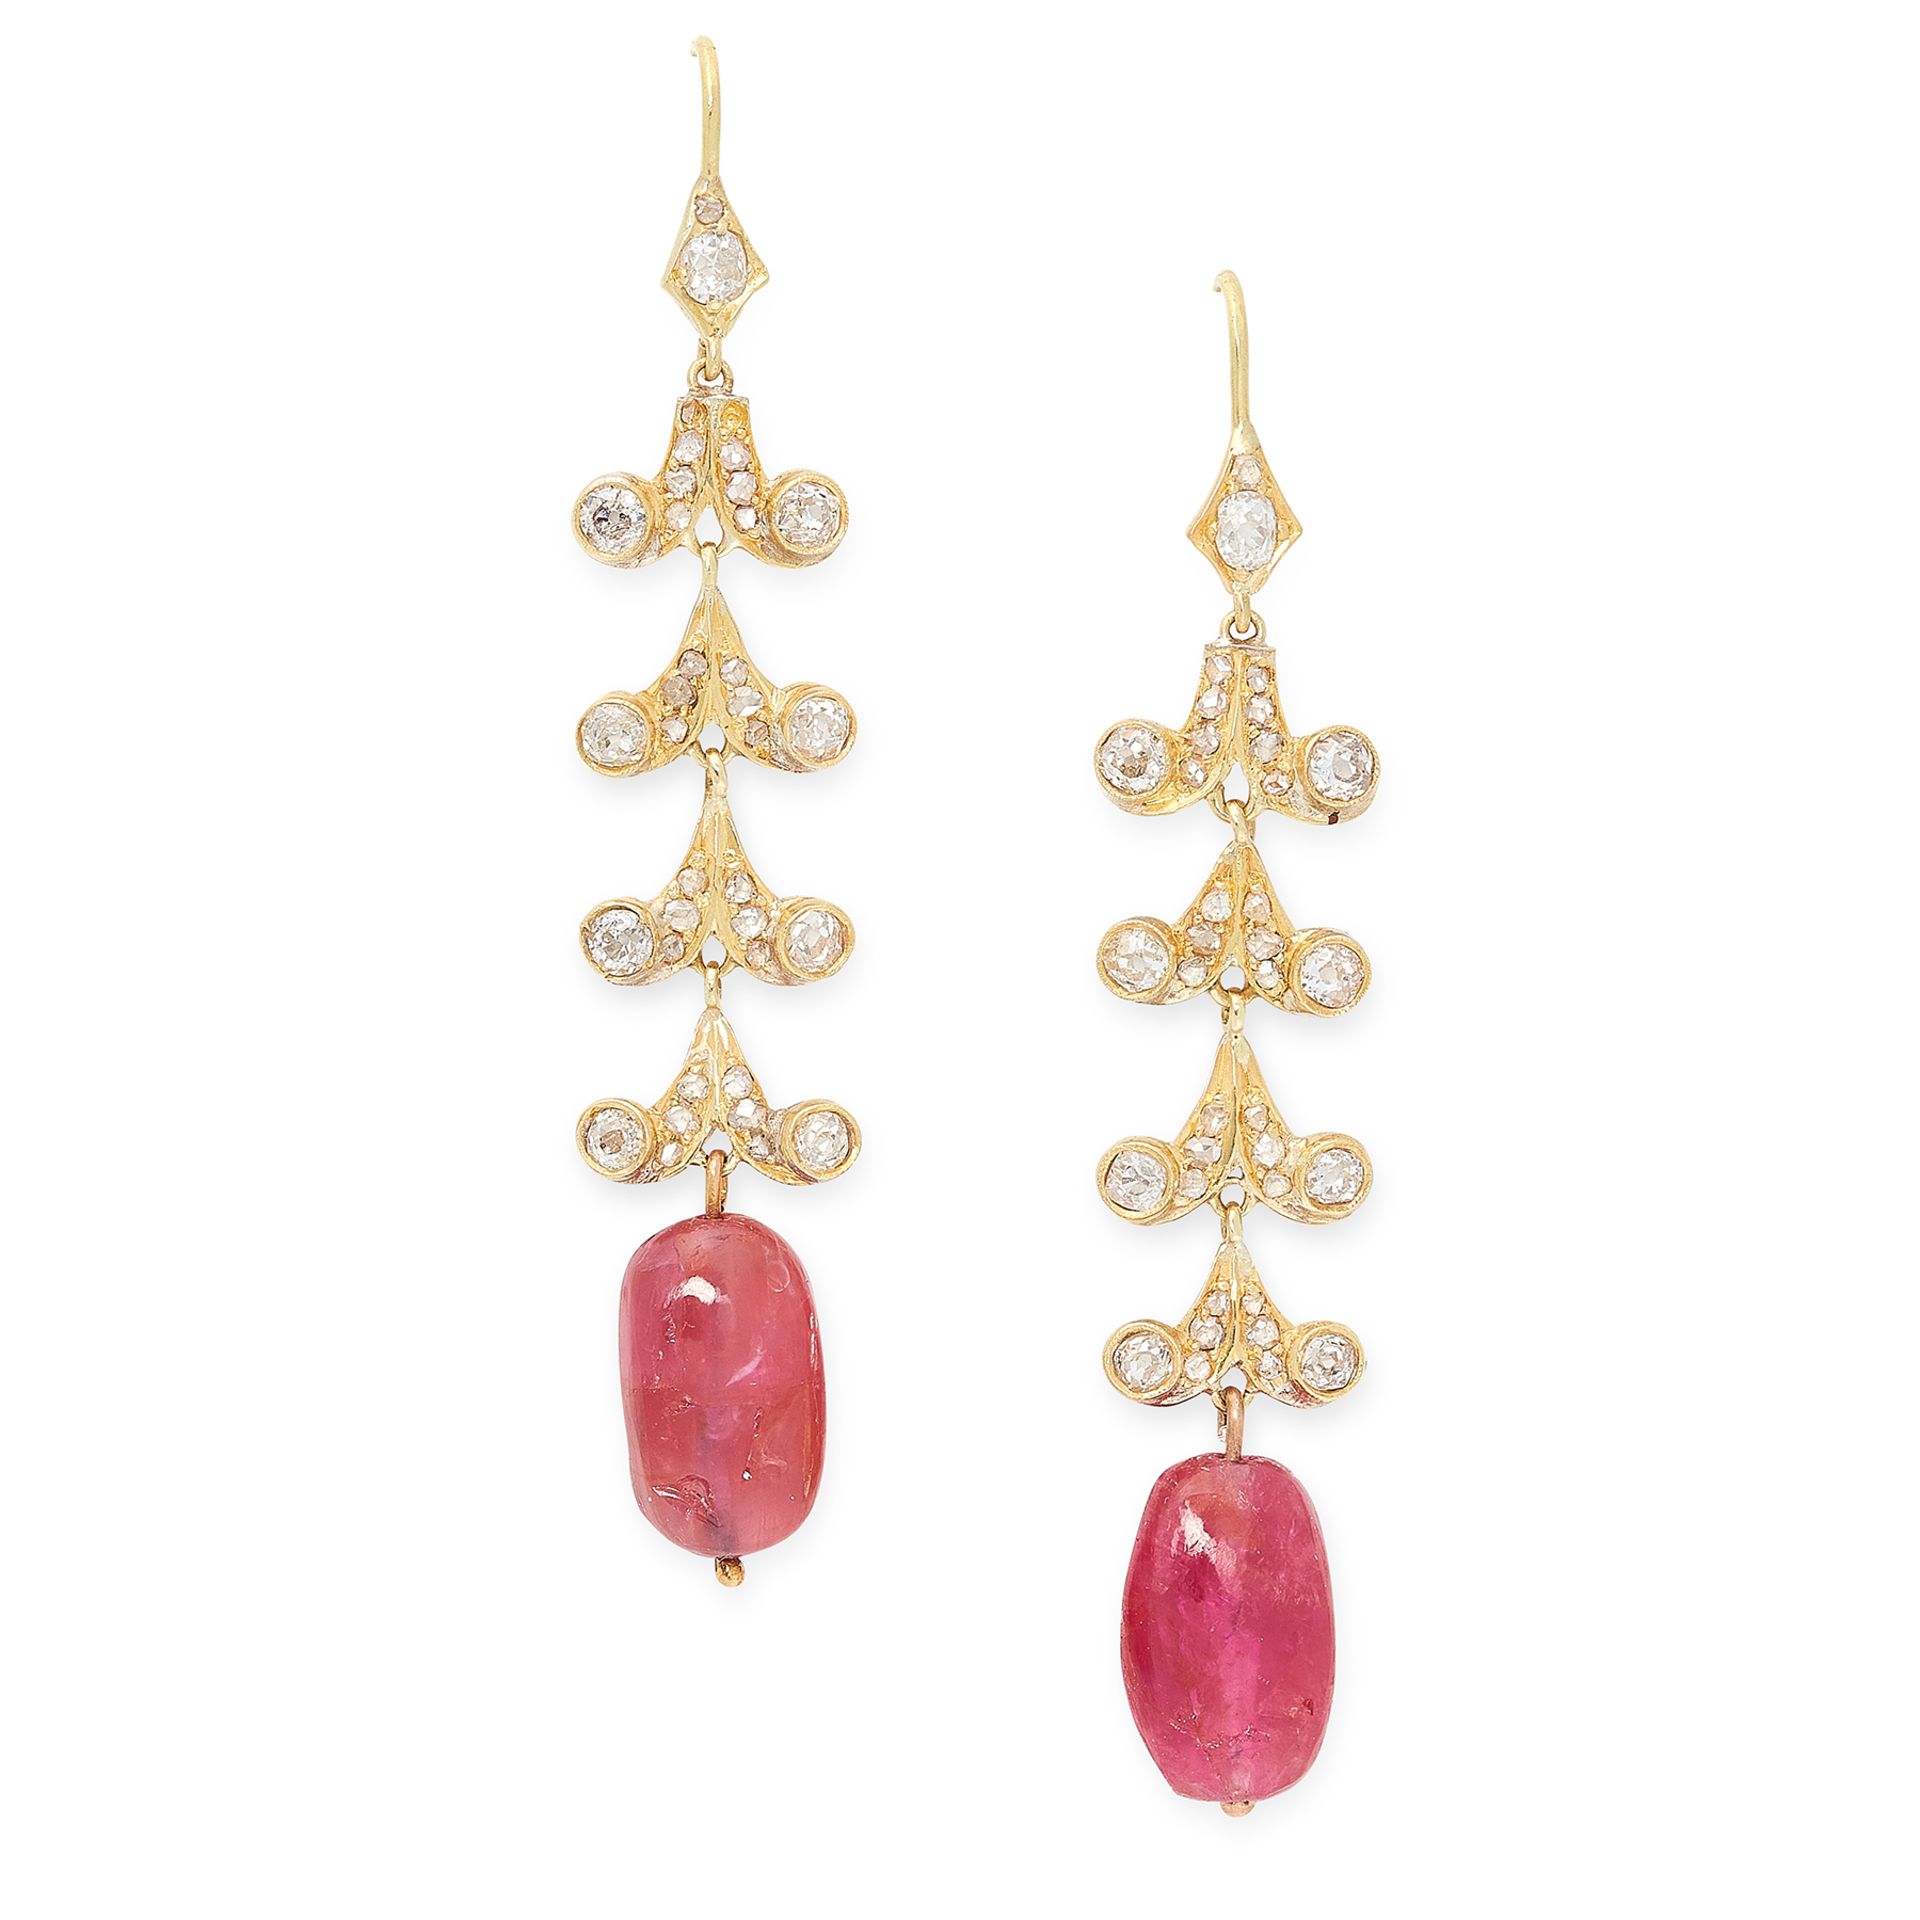 A PAIR OF BURMA NO HEAT RUBY AND DIAMOND EARRINGS in yellow gold, each designed as a chandelier of